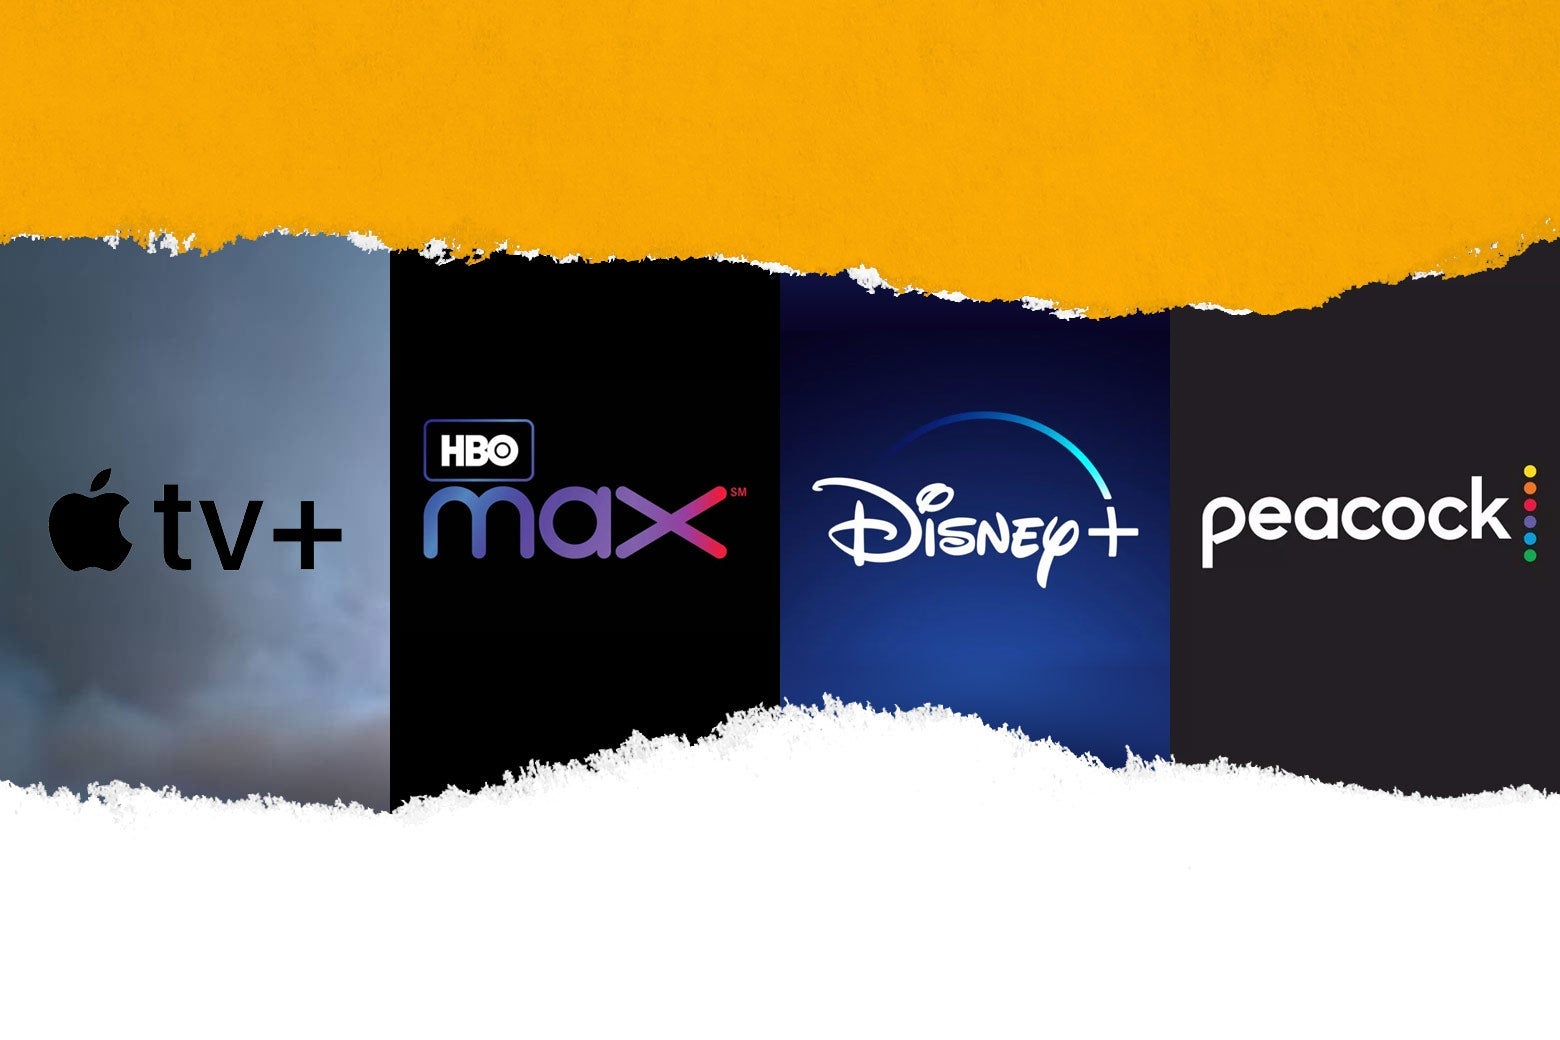 The logos for Apple TV+, HBO Max, Disney+, and Peacock.